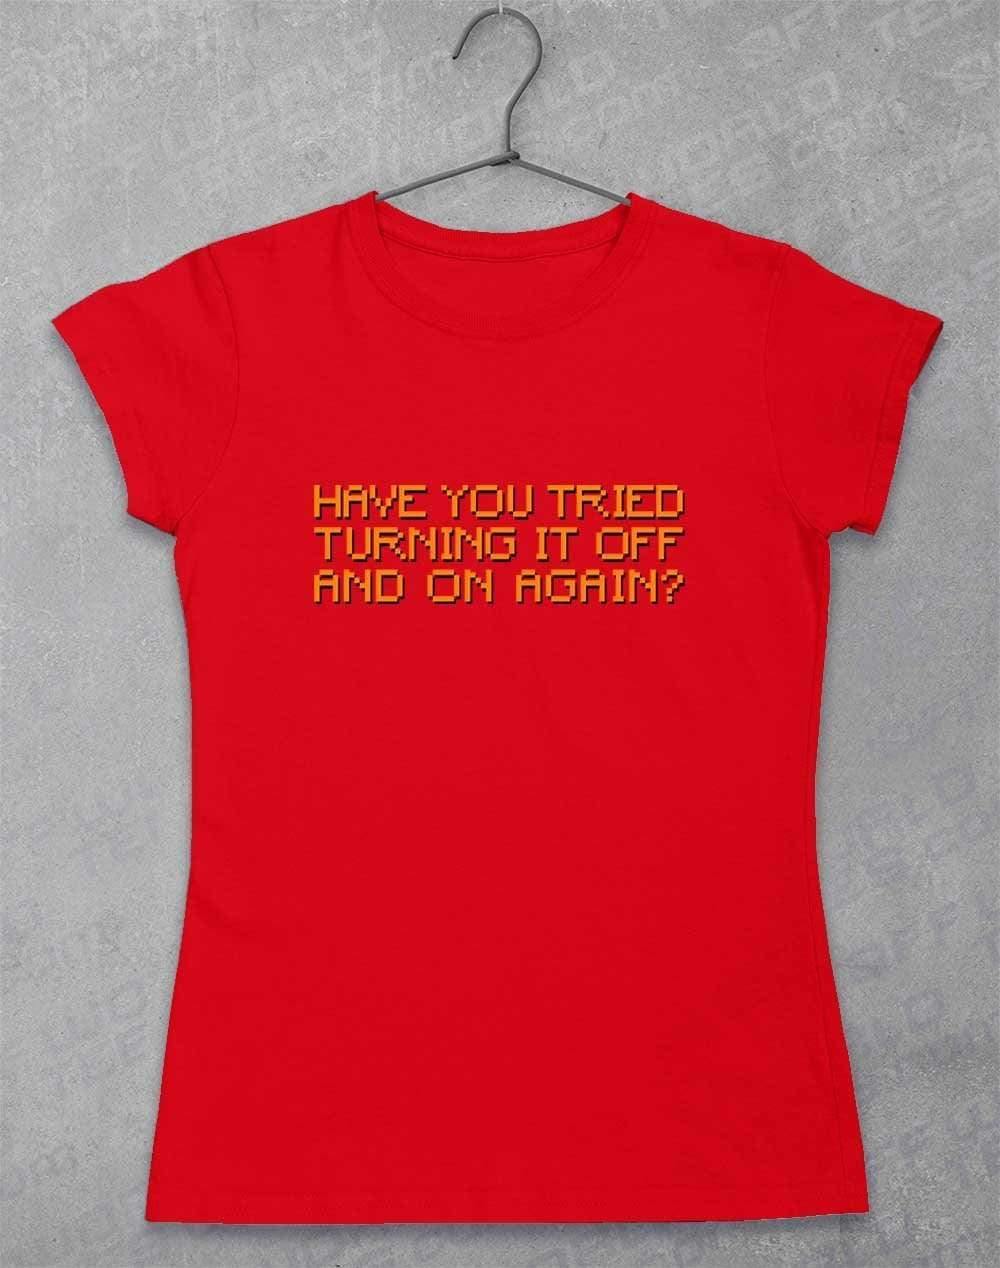 Off and On Again Women's T-Shirt 8-10 / Red  - Off World Tees